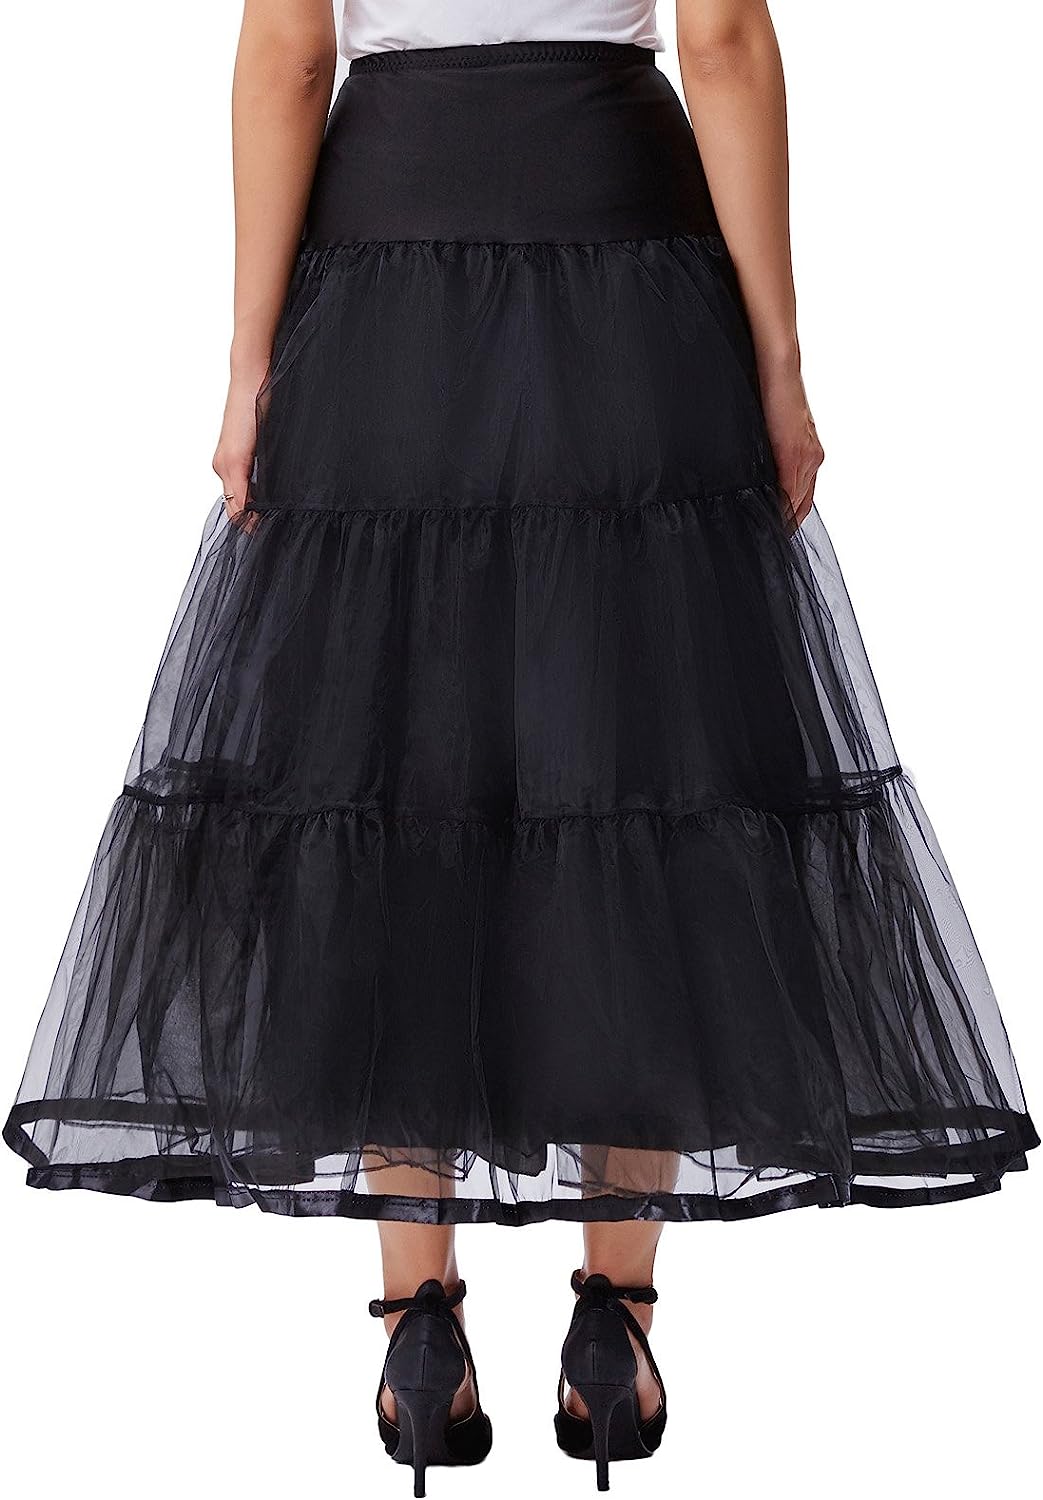 GRACE KARIN Women's Ankle Length Petticoats Wedding Slips: Adding Grace and Volume to Your Dress